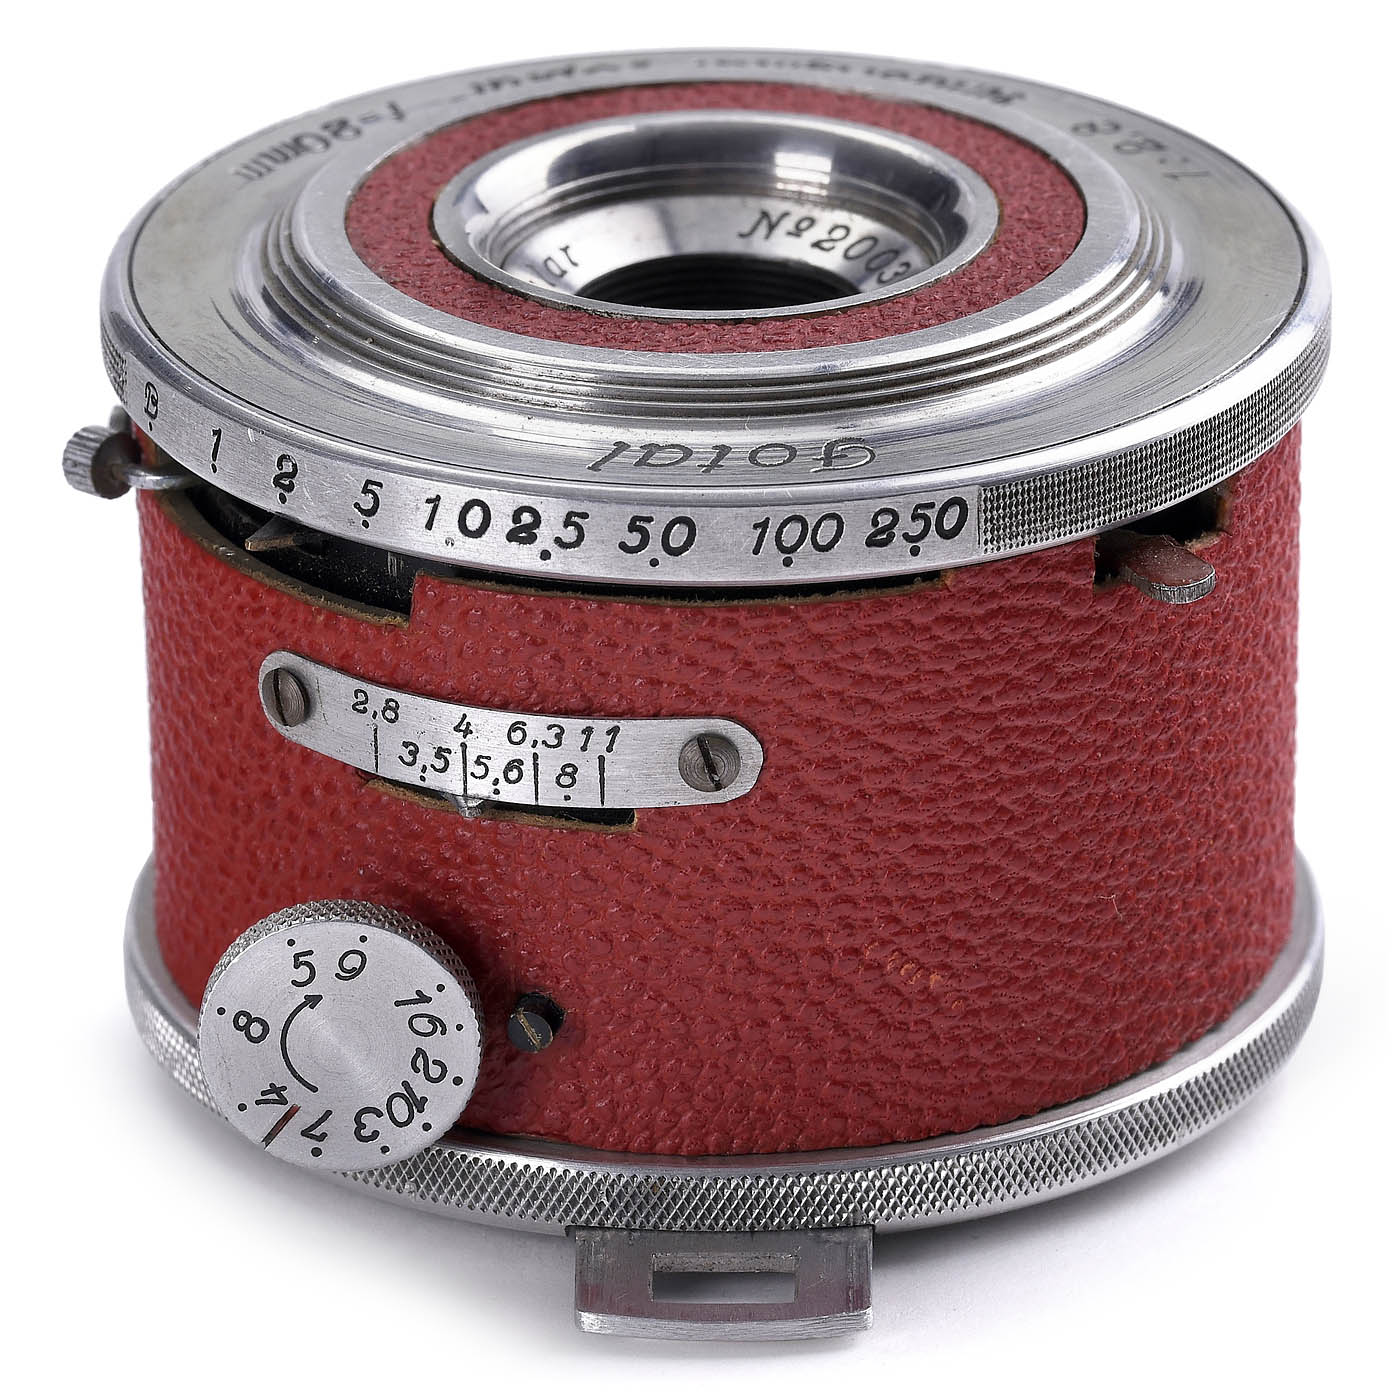 Fotal (Red) Miniature Camera, c. 1955 - Image 3 of 5